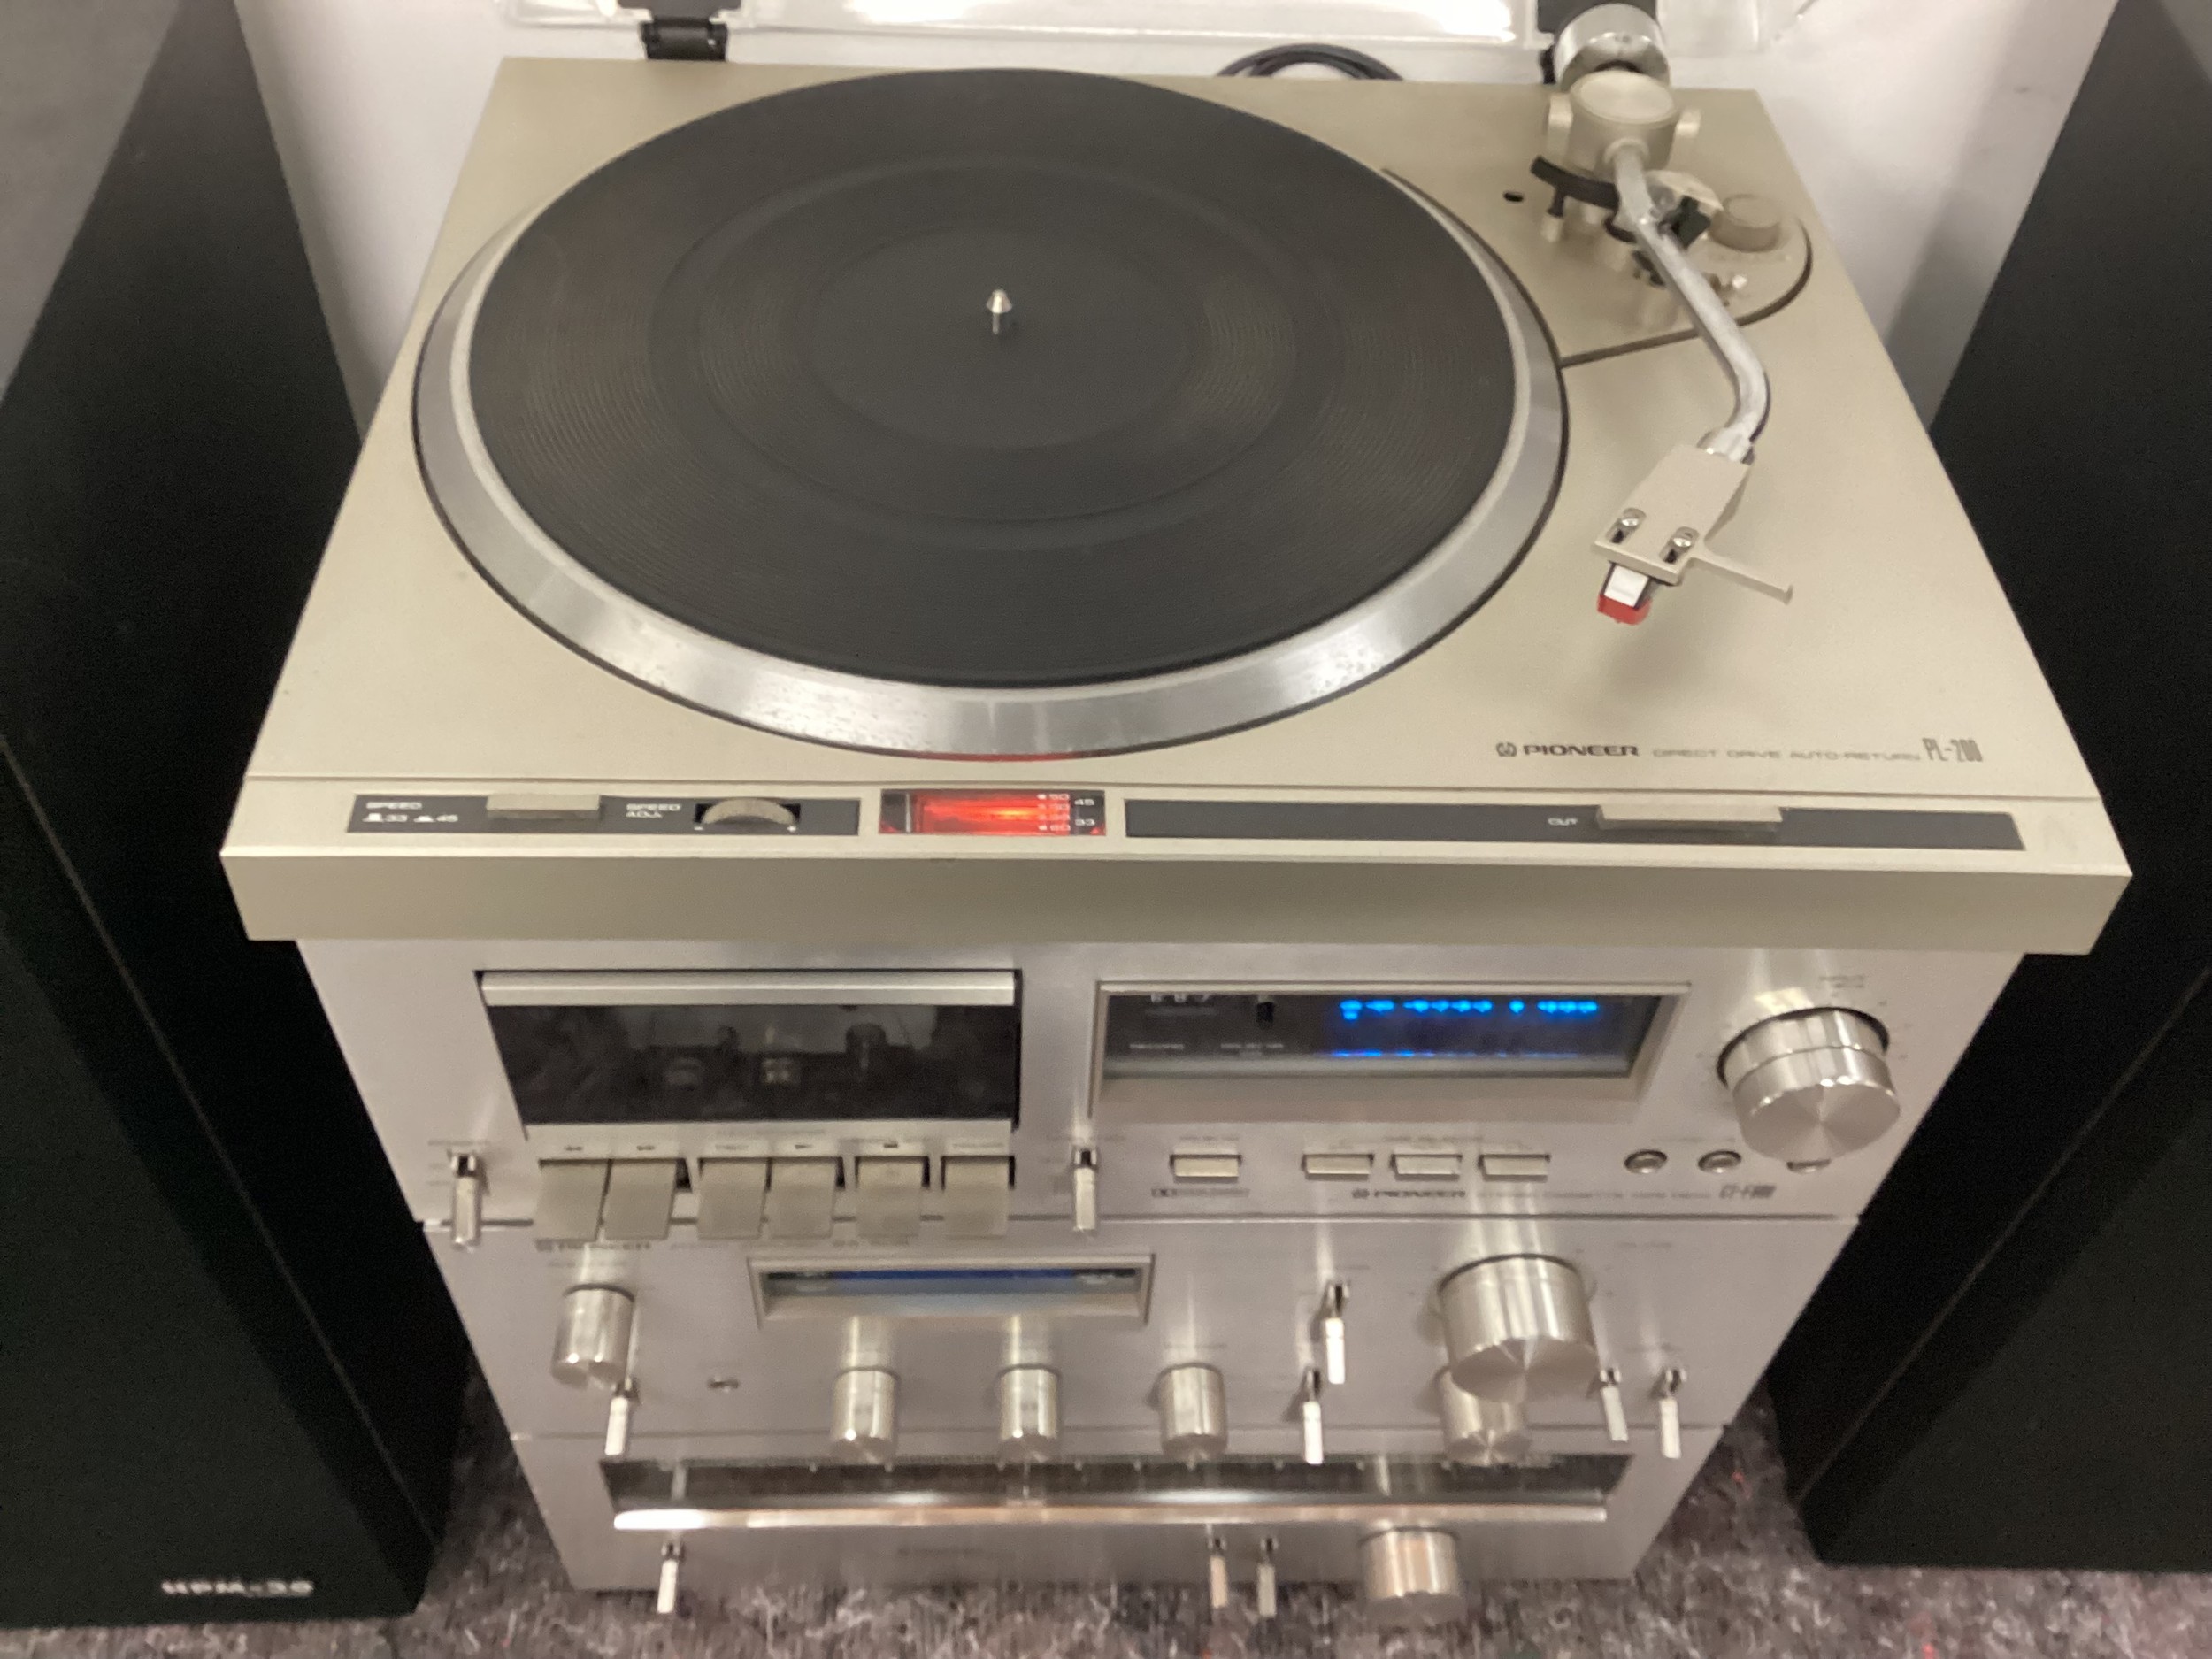 PIONEER STACKING HIFI SEPARATES SYSTEM. Consisting of - Tuner TX608 - Turntable PL200 - Amplifier - Image 2 of 10